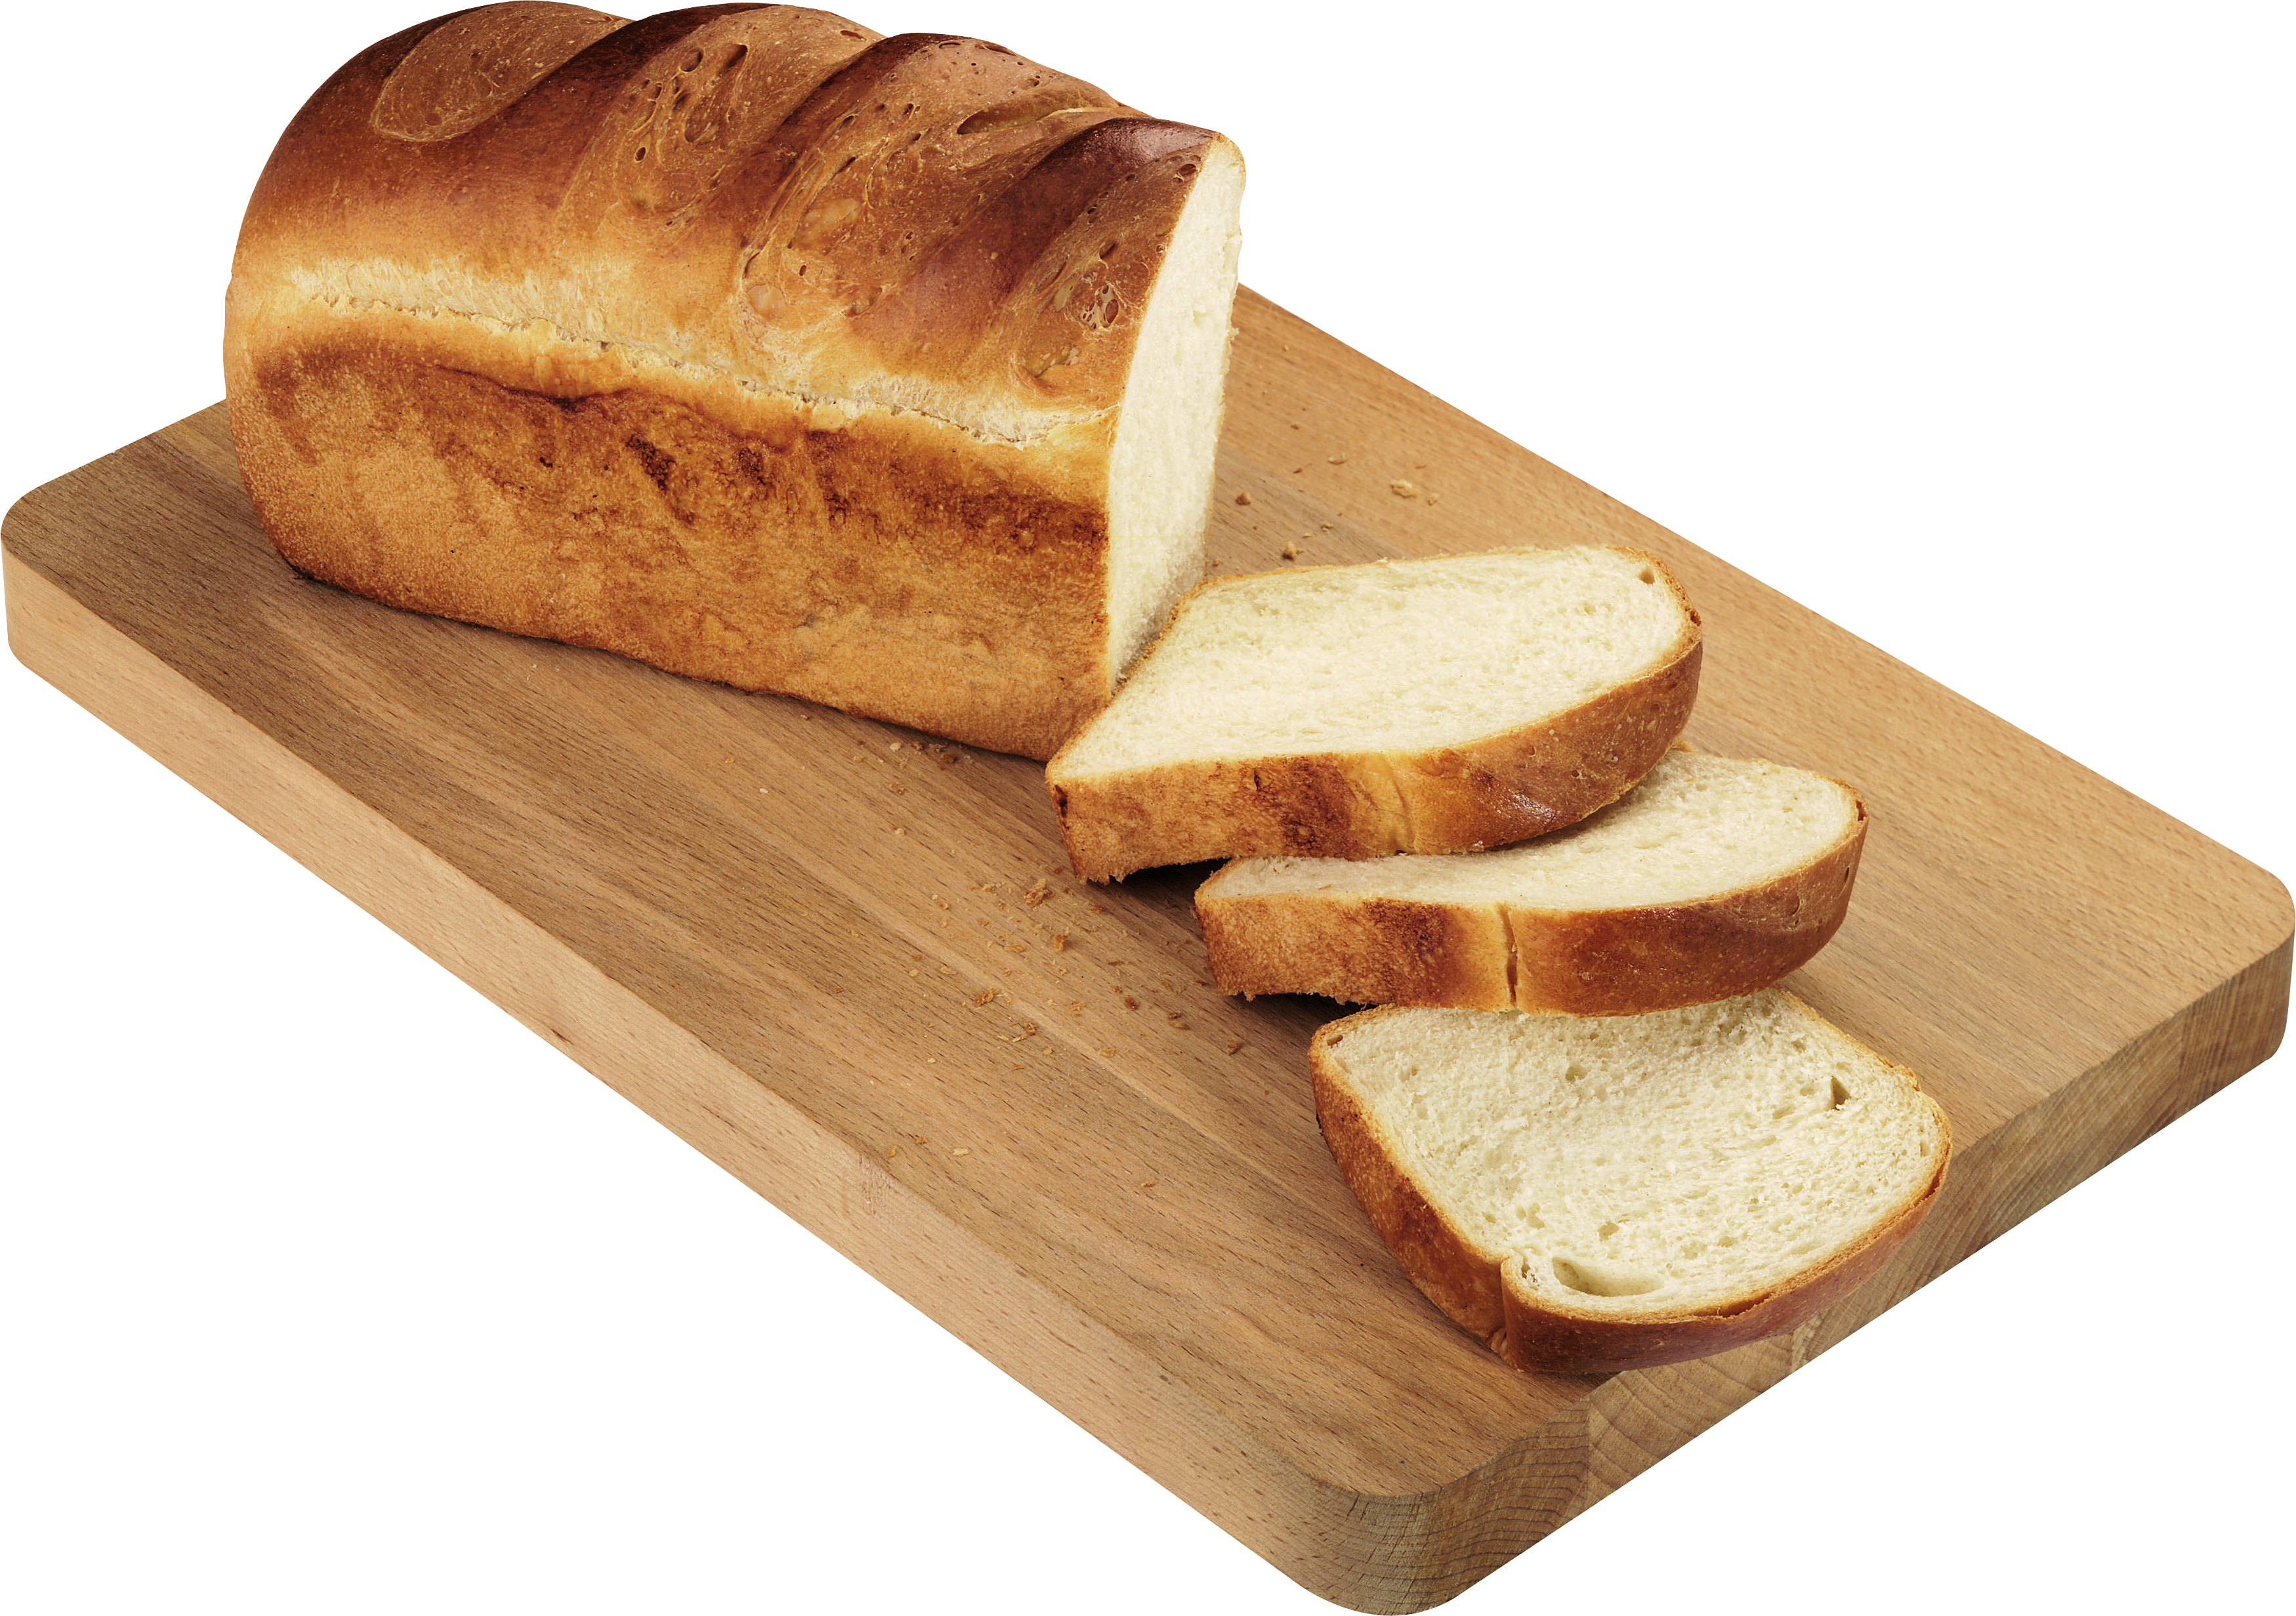 Sliced Loaf Of Bread   Bread Hd Png - Bread Images, Transparent background PNG HD thumbnail